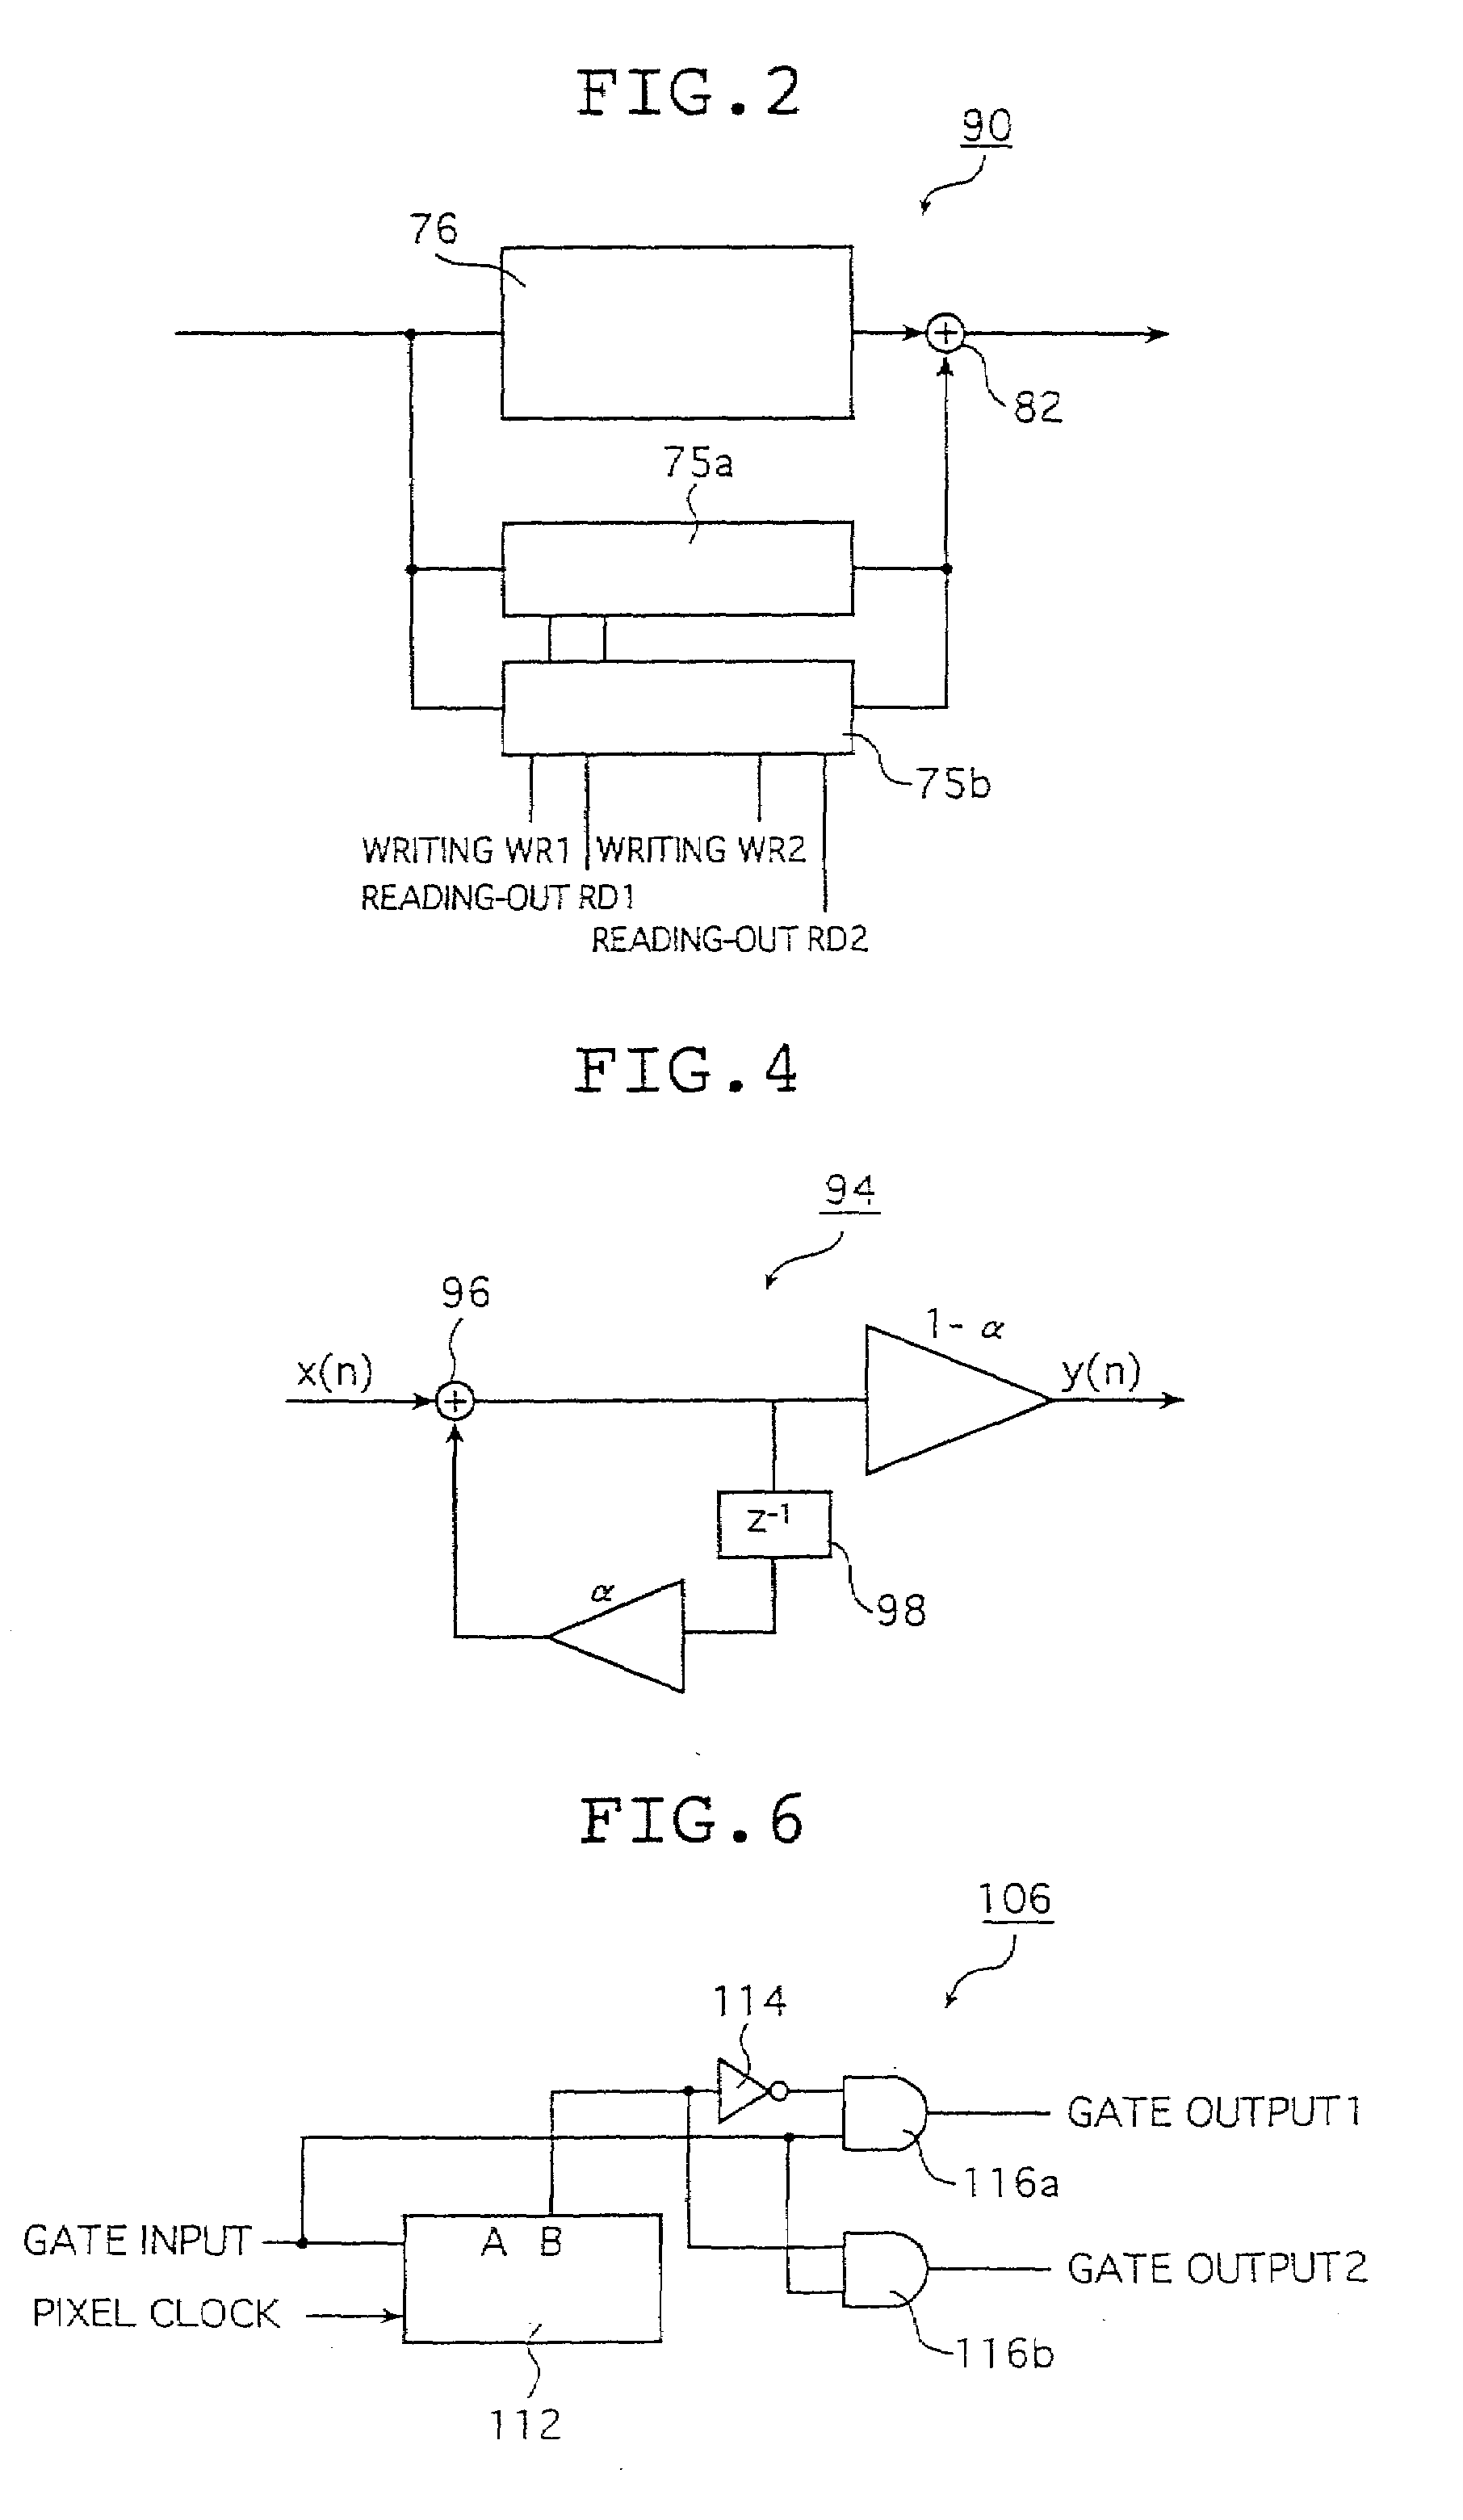 Image processing device for carrying out dodging treatment